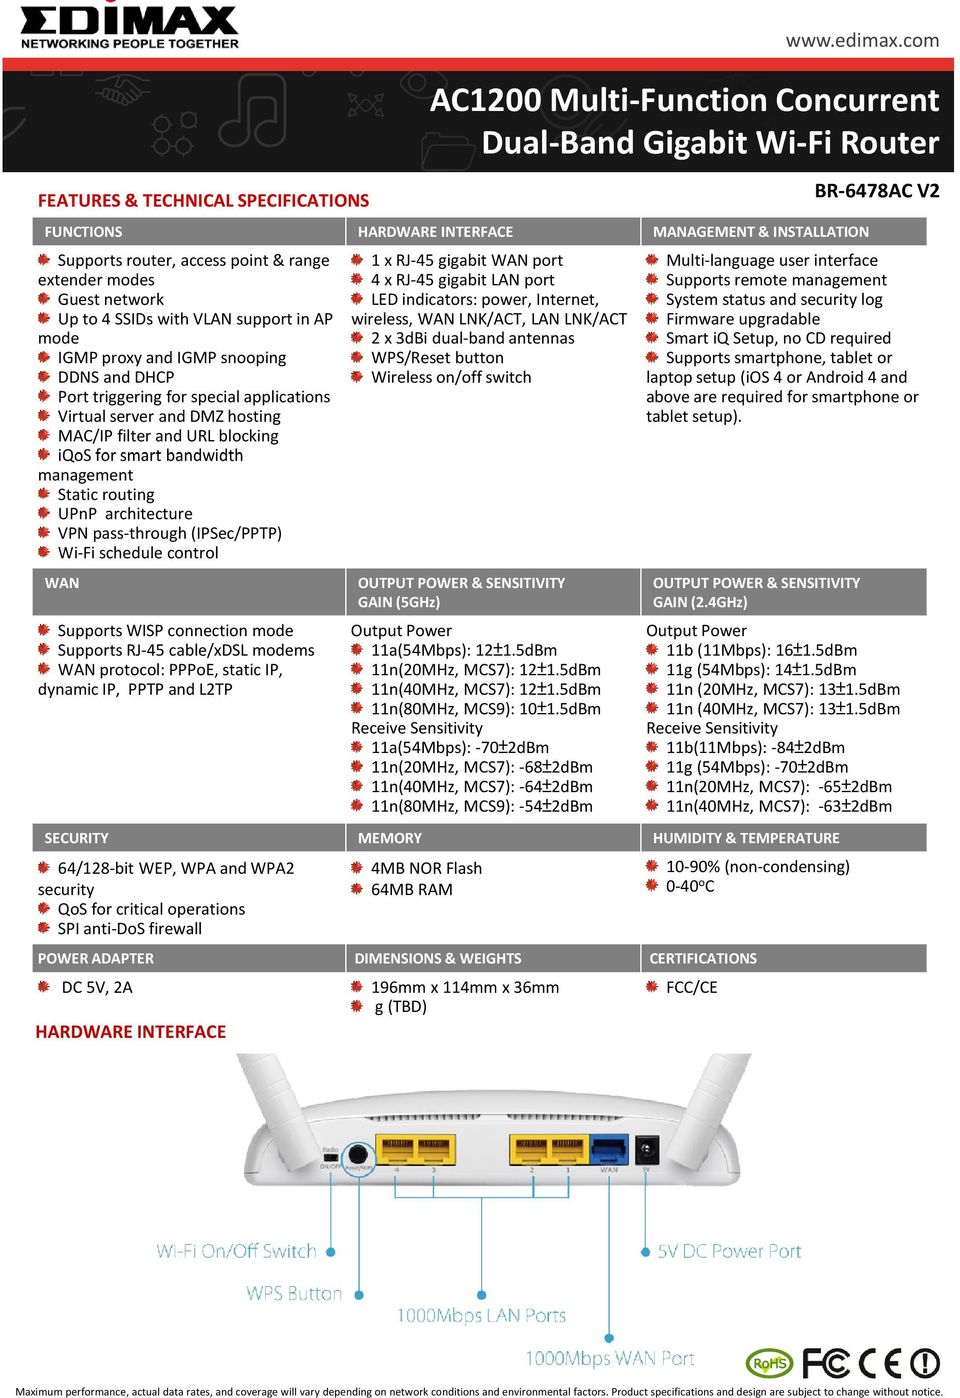 routing UPnP architecture VPN pass-through (IPSec/PPTP) Wi-Fi schedule control WAN Supports WISP connection mode Supports RJ-45 cable/xdsl modems WAN protocol: PPPoE, static IP, dynamic IP, PPTP and